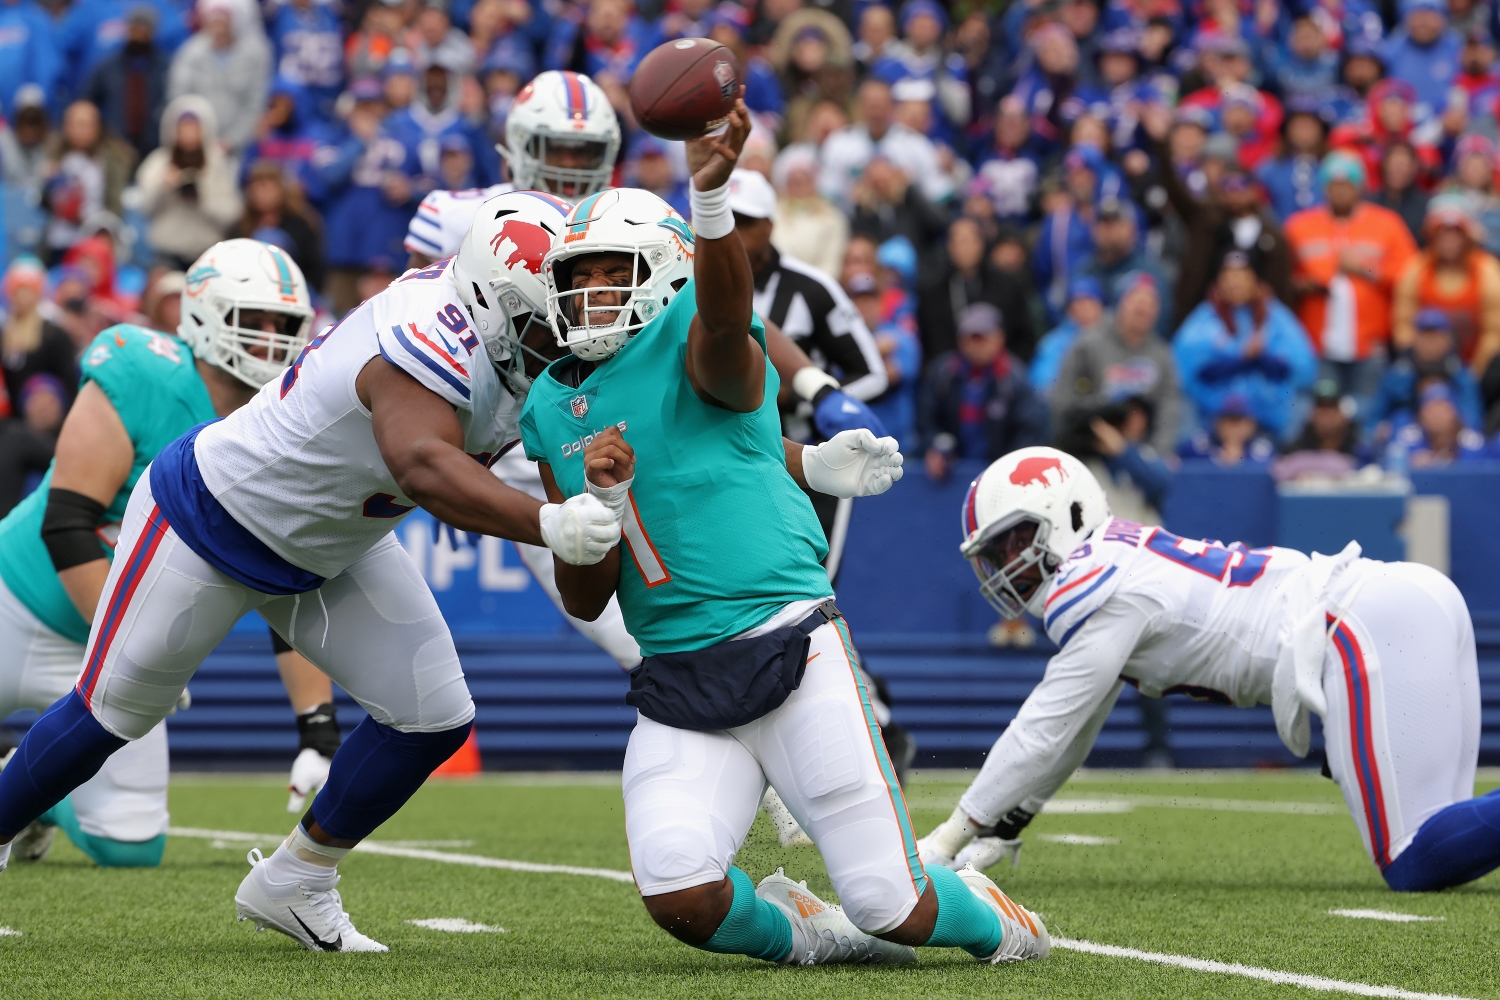 Miami Dolphins quarterback Tua Tagovailoa throws a pass while getting hit by a Buffalo Bills defender.